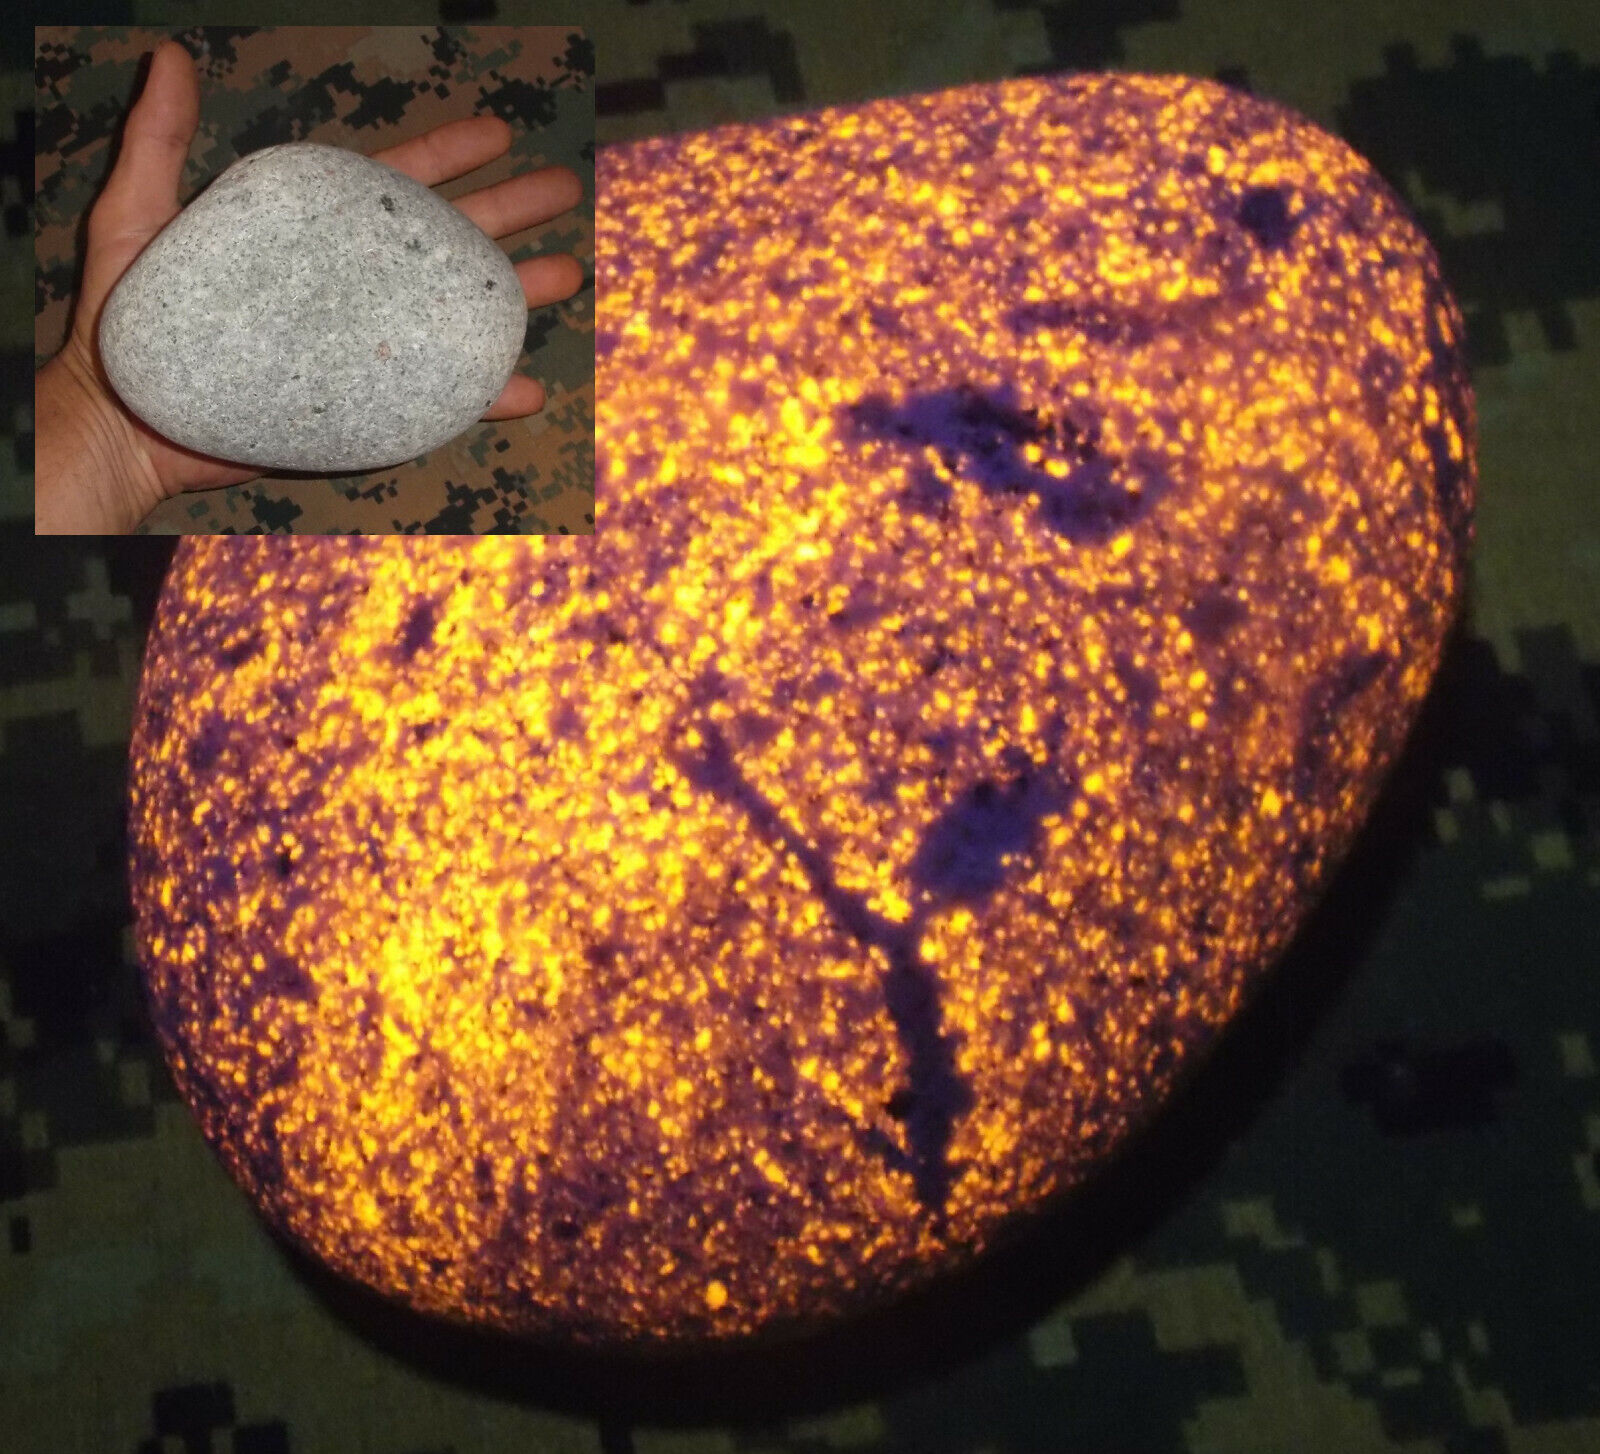 3lbs 5oz (One Eye) - Fluorescent Sodalite Rock from which Yooperlite was Born